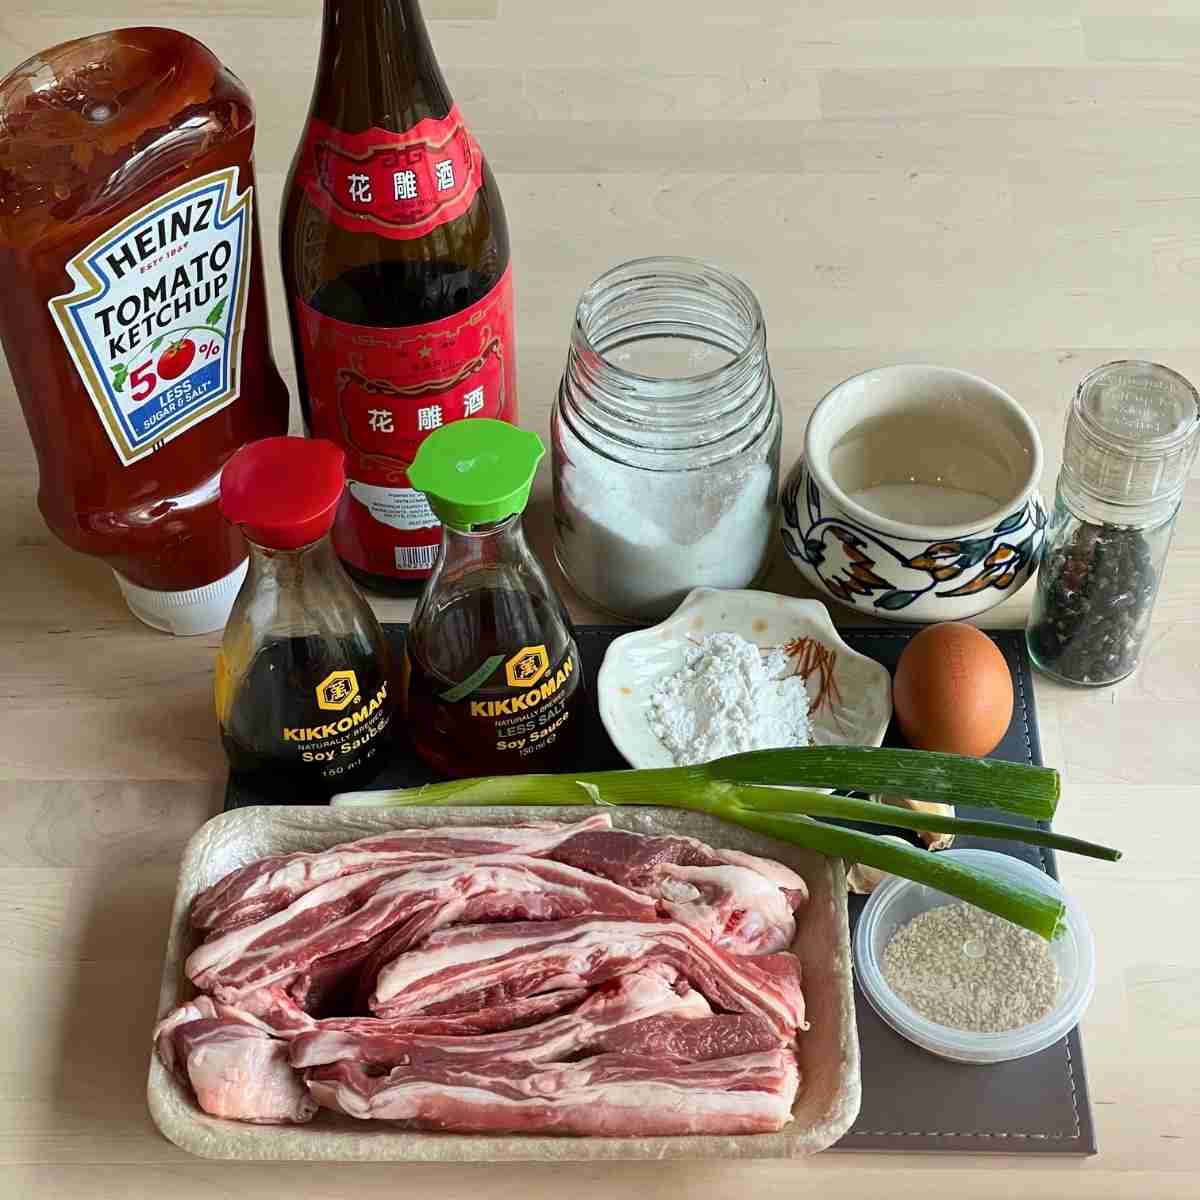 Capital spare ribs ingredients